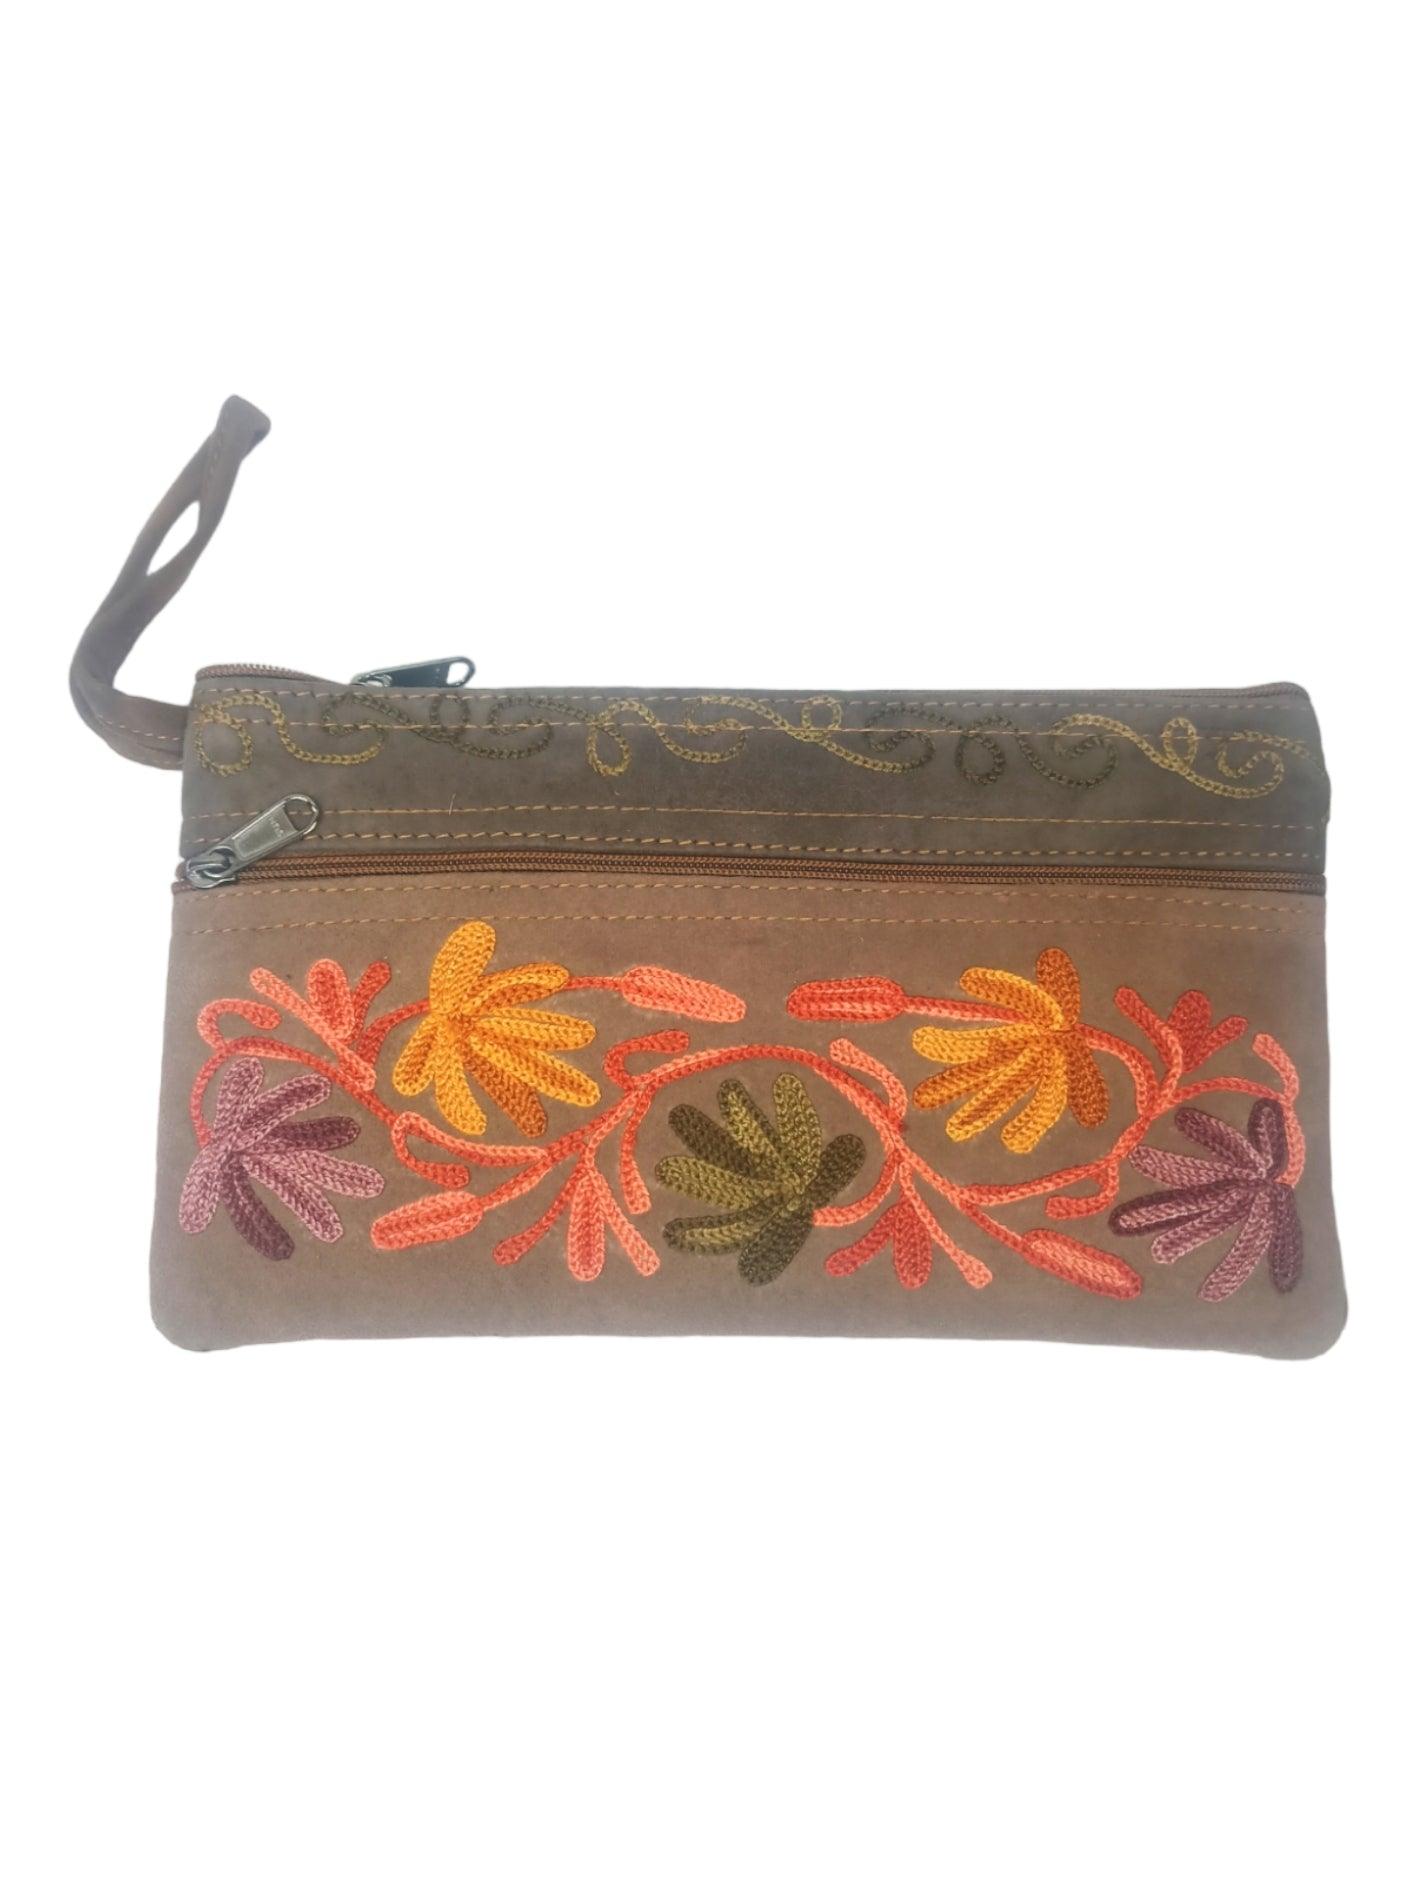 Suede Leather Purse | Aari Hand Purch | 8" 3 Zip Embroidered Purse